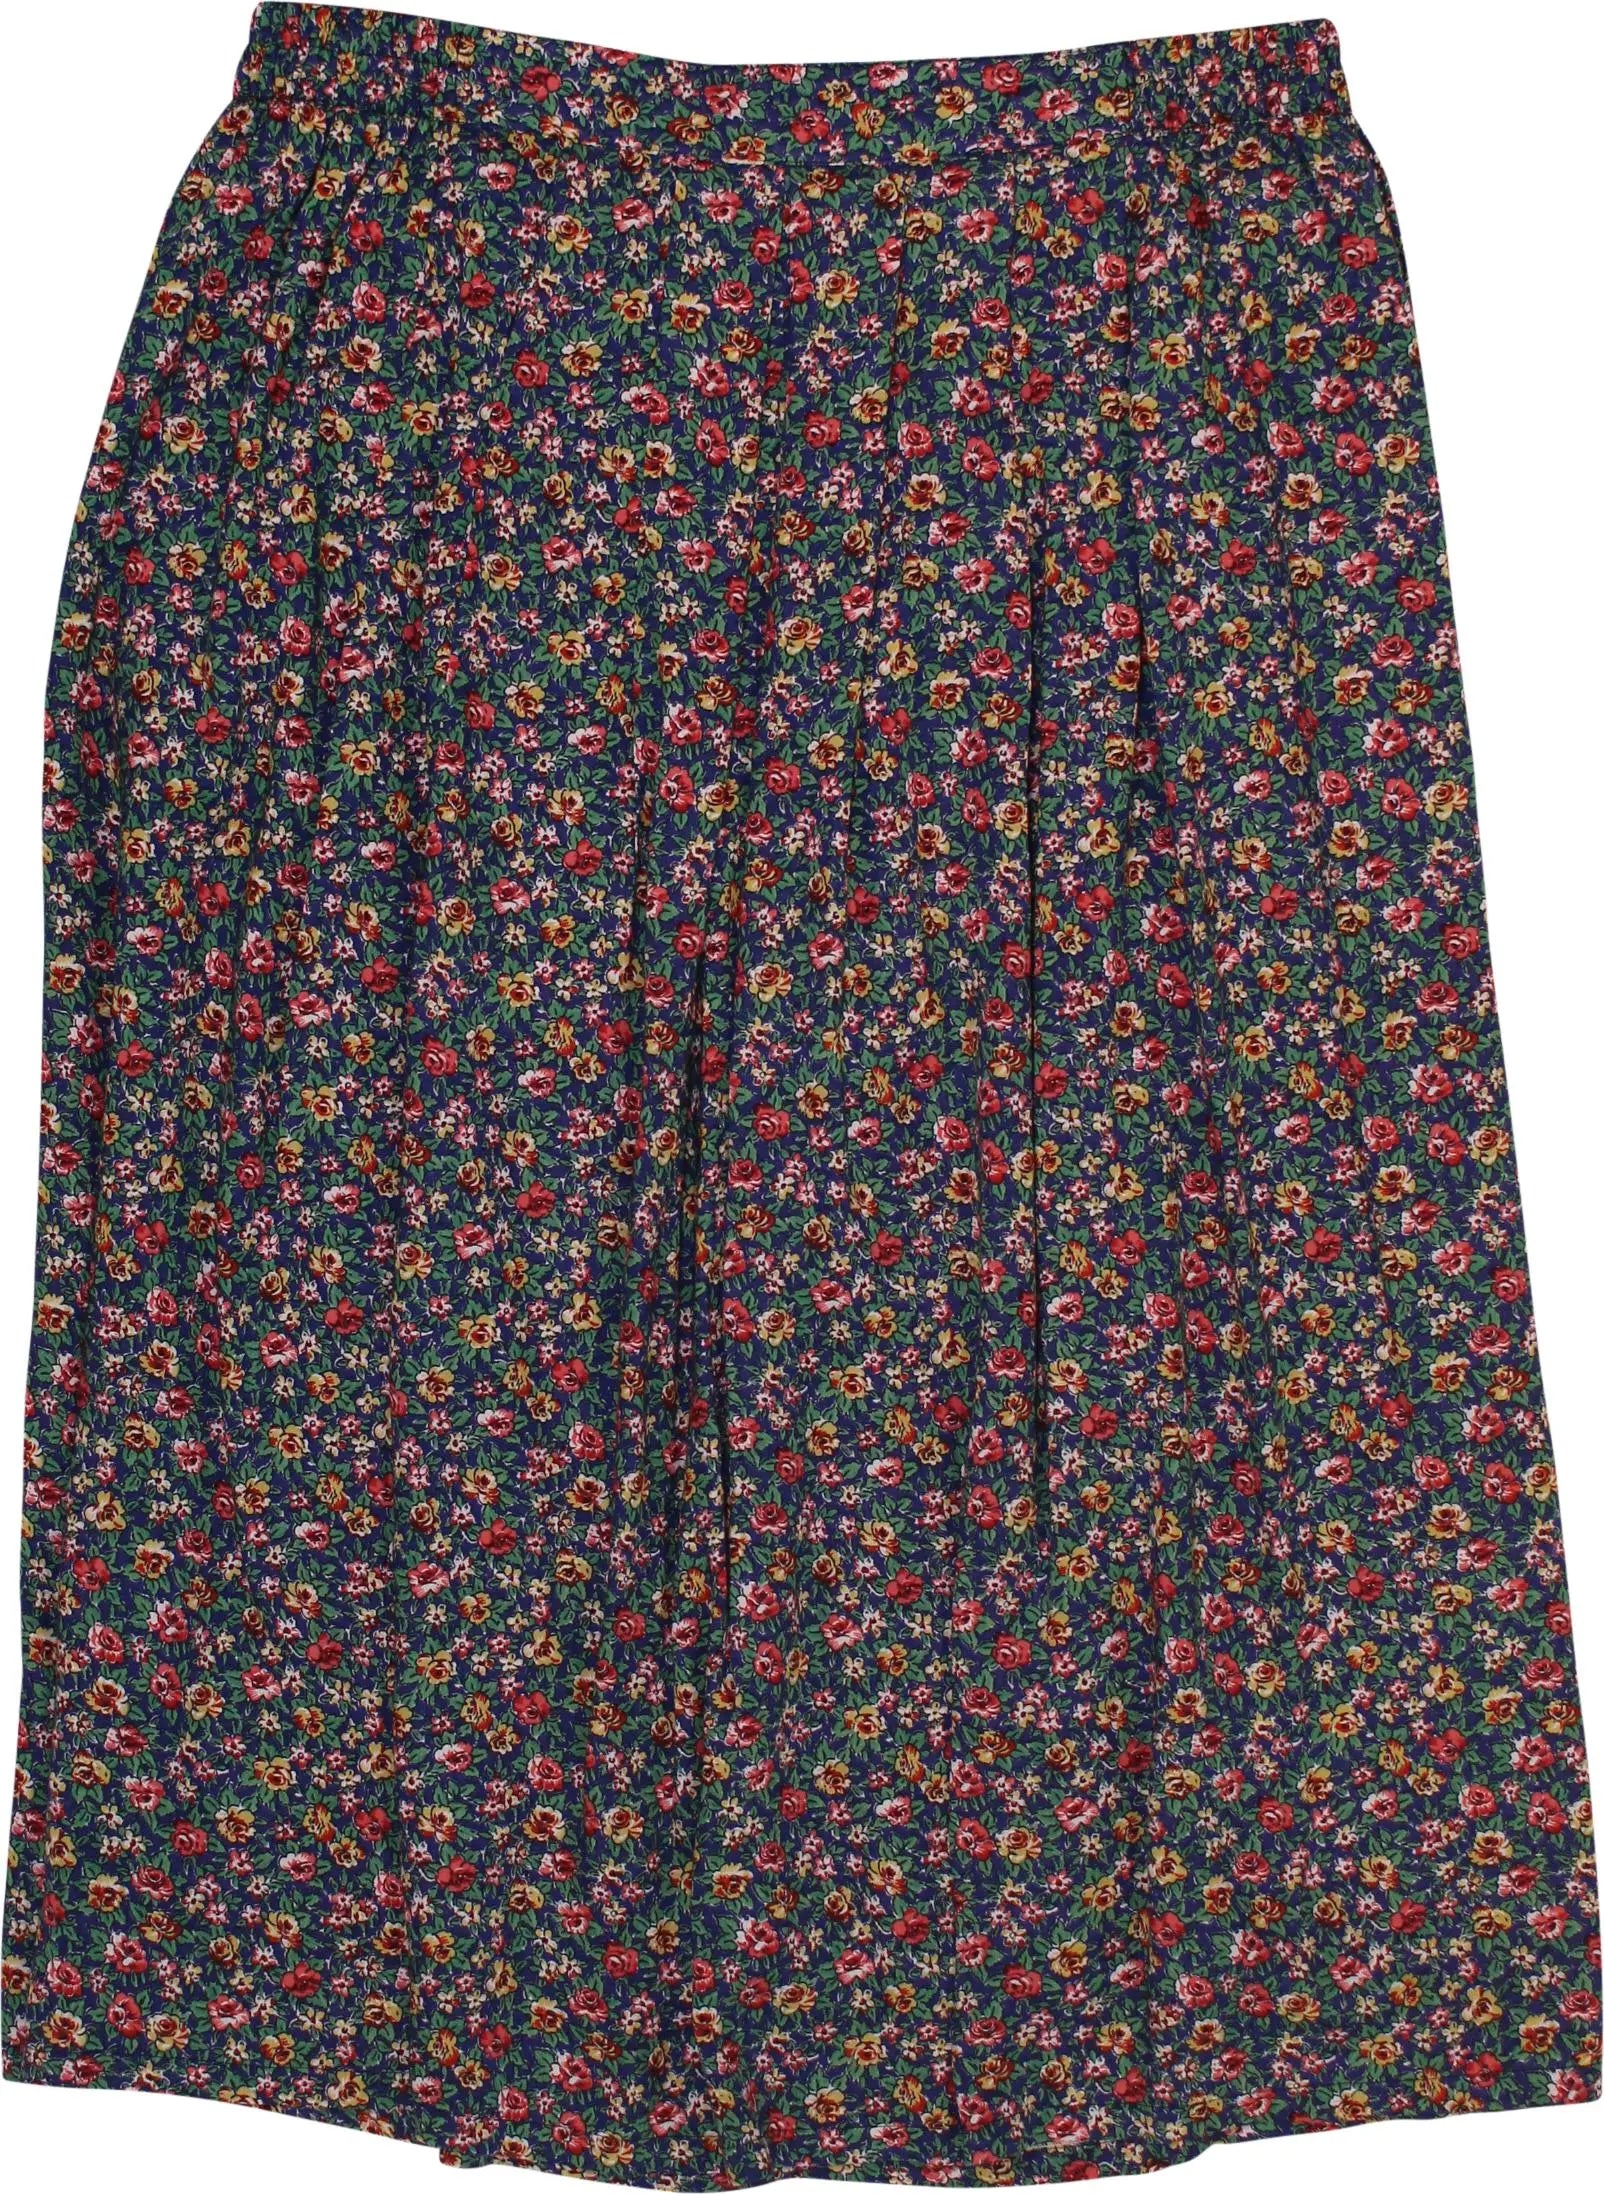 Unknown - 80s Skirt with Flower Print- ThriftTale.com - Vintage and second handclothing